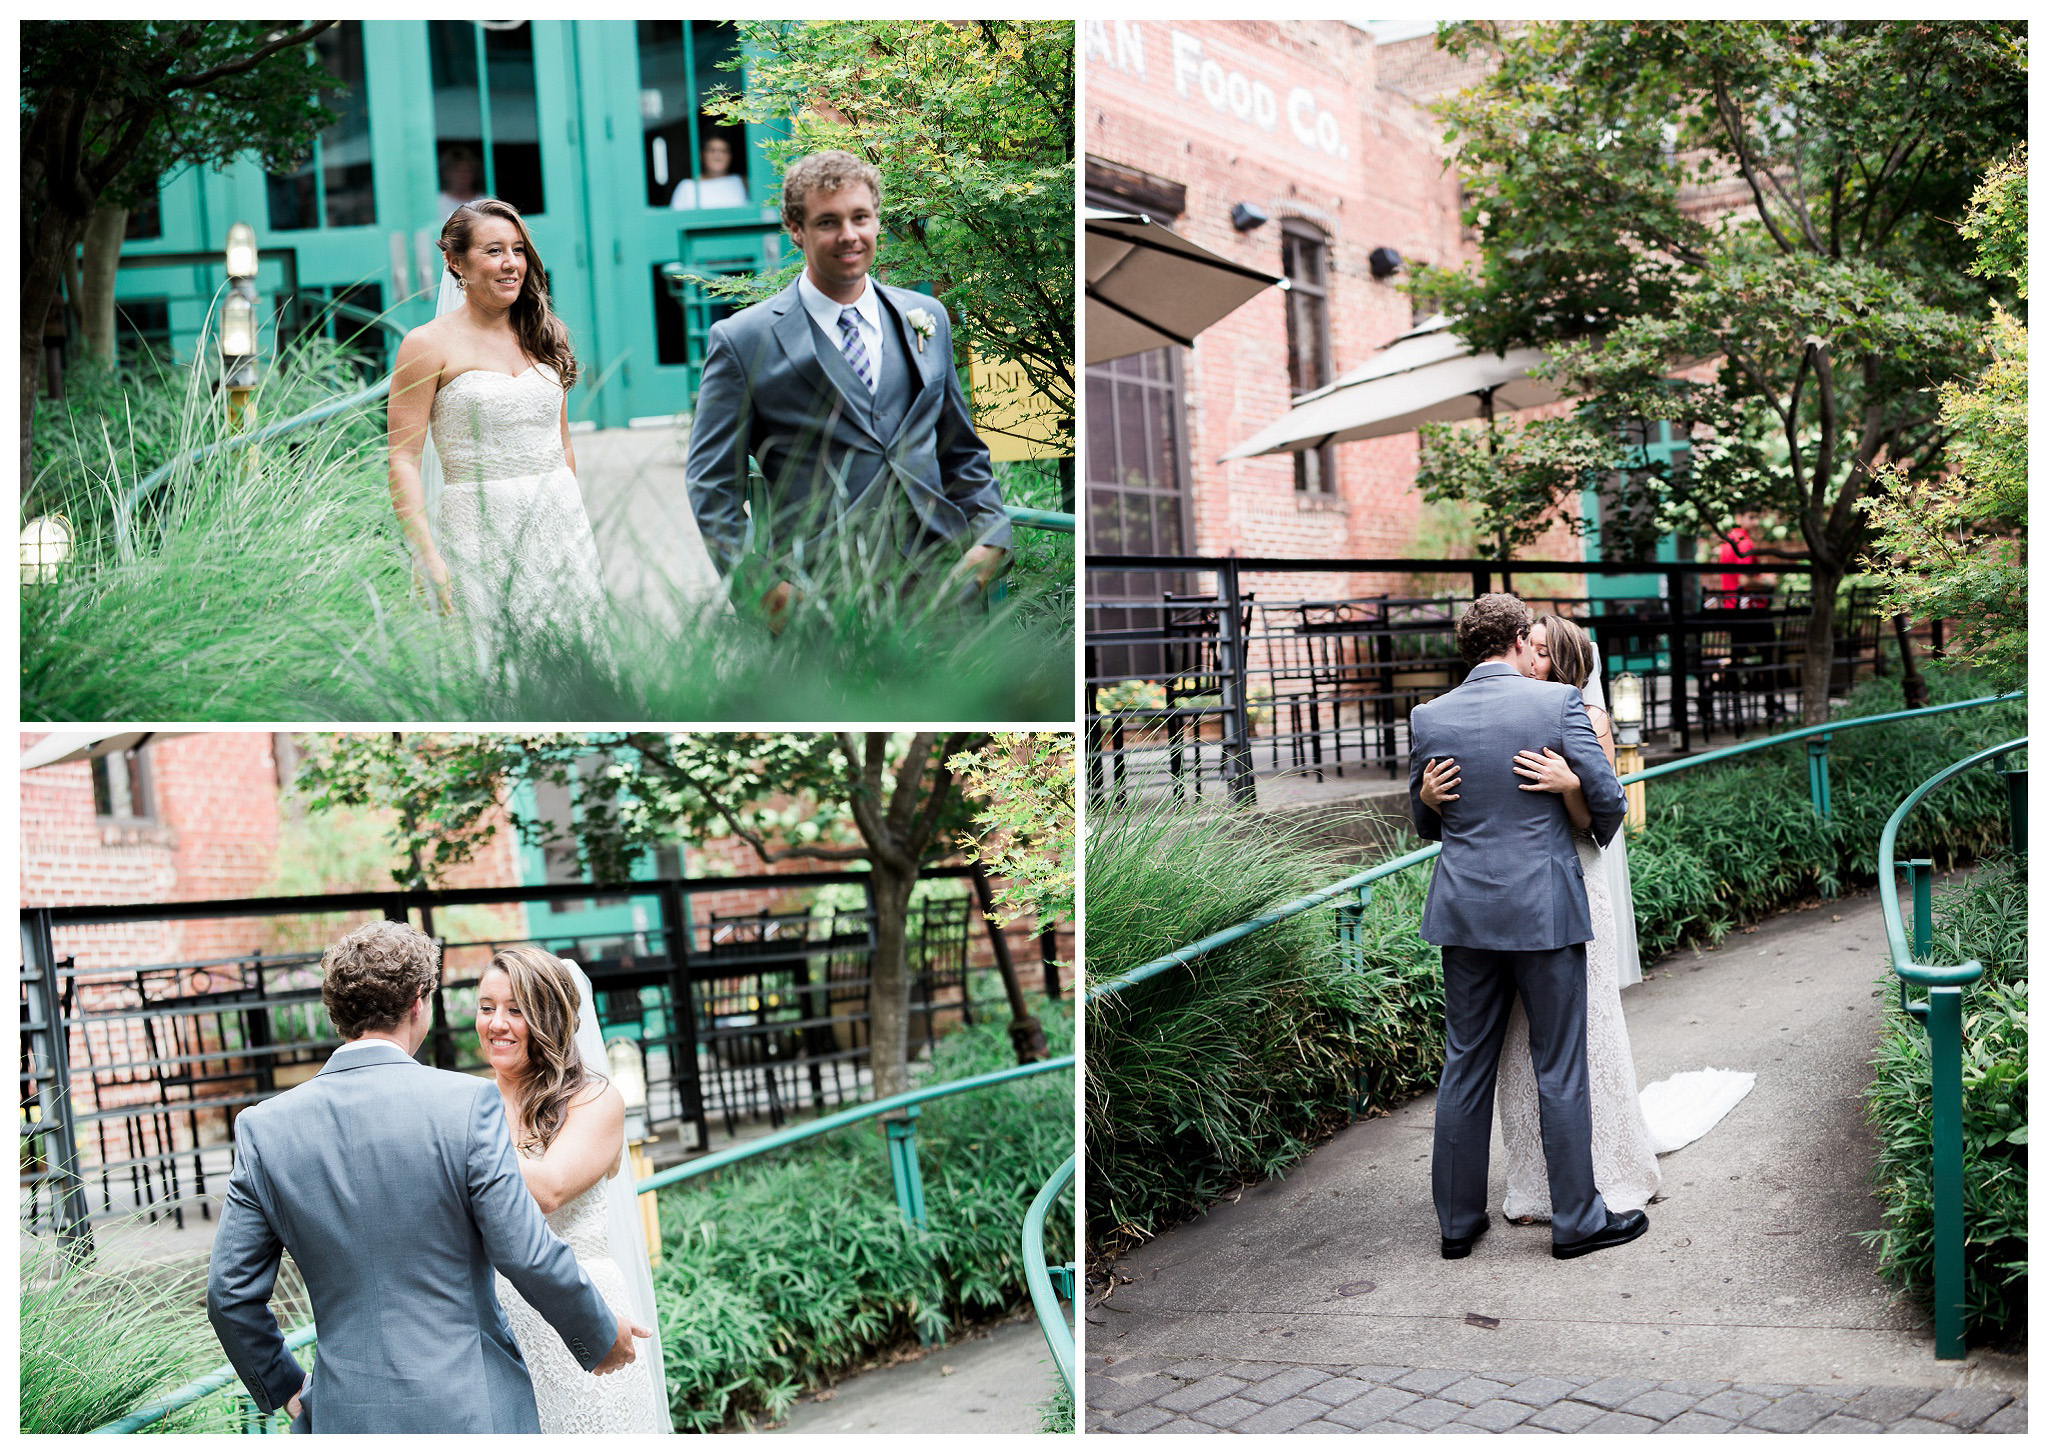 The Happy Couple pictures together on brick walkways,  Venue and Catering – King plow Event Gallery and Bold American Events Decor and flowers – Stylish Stems Music and Band – Seven Sharp Nine Transportation – Georgia Trolley Photographer One Life Photography